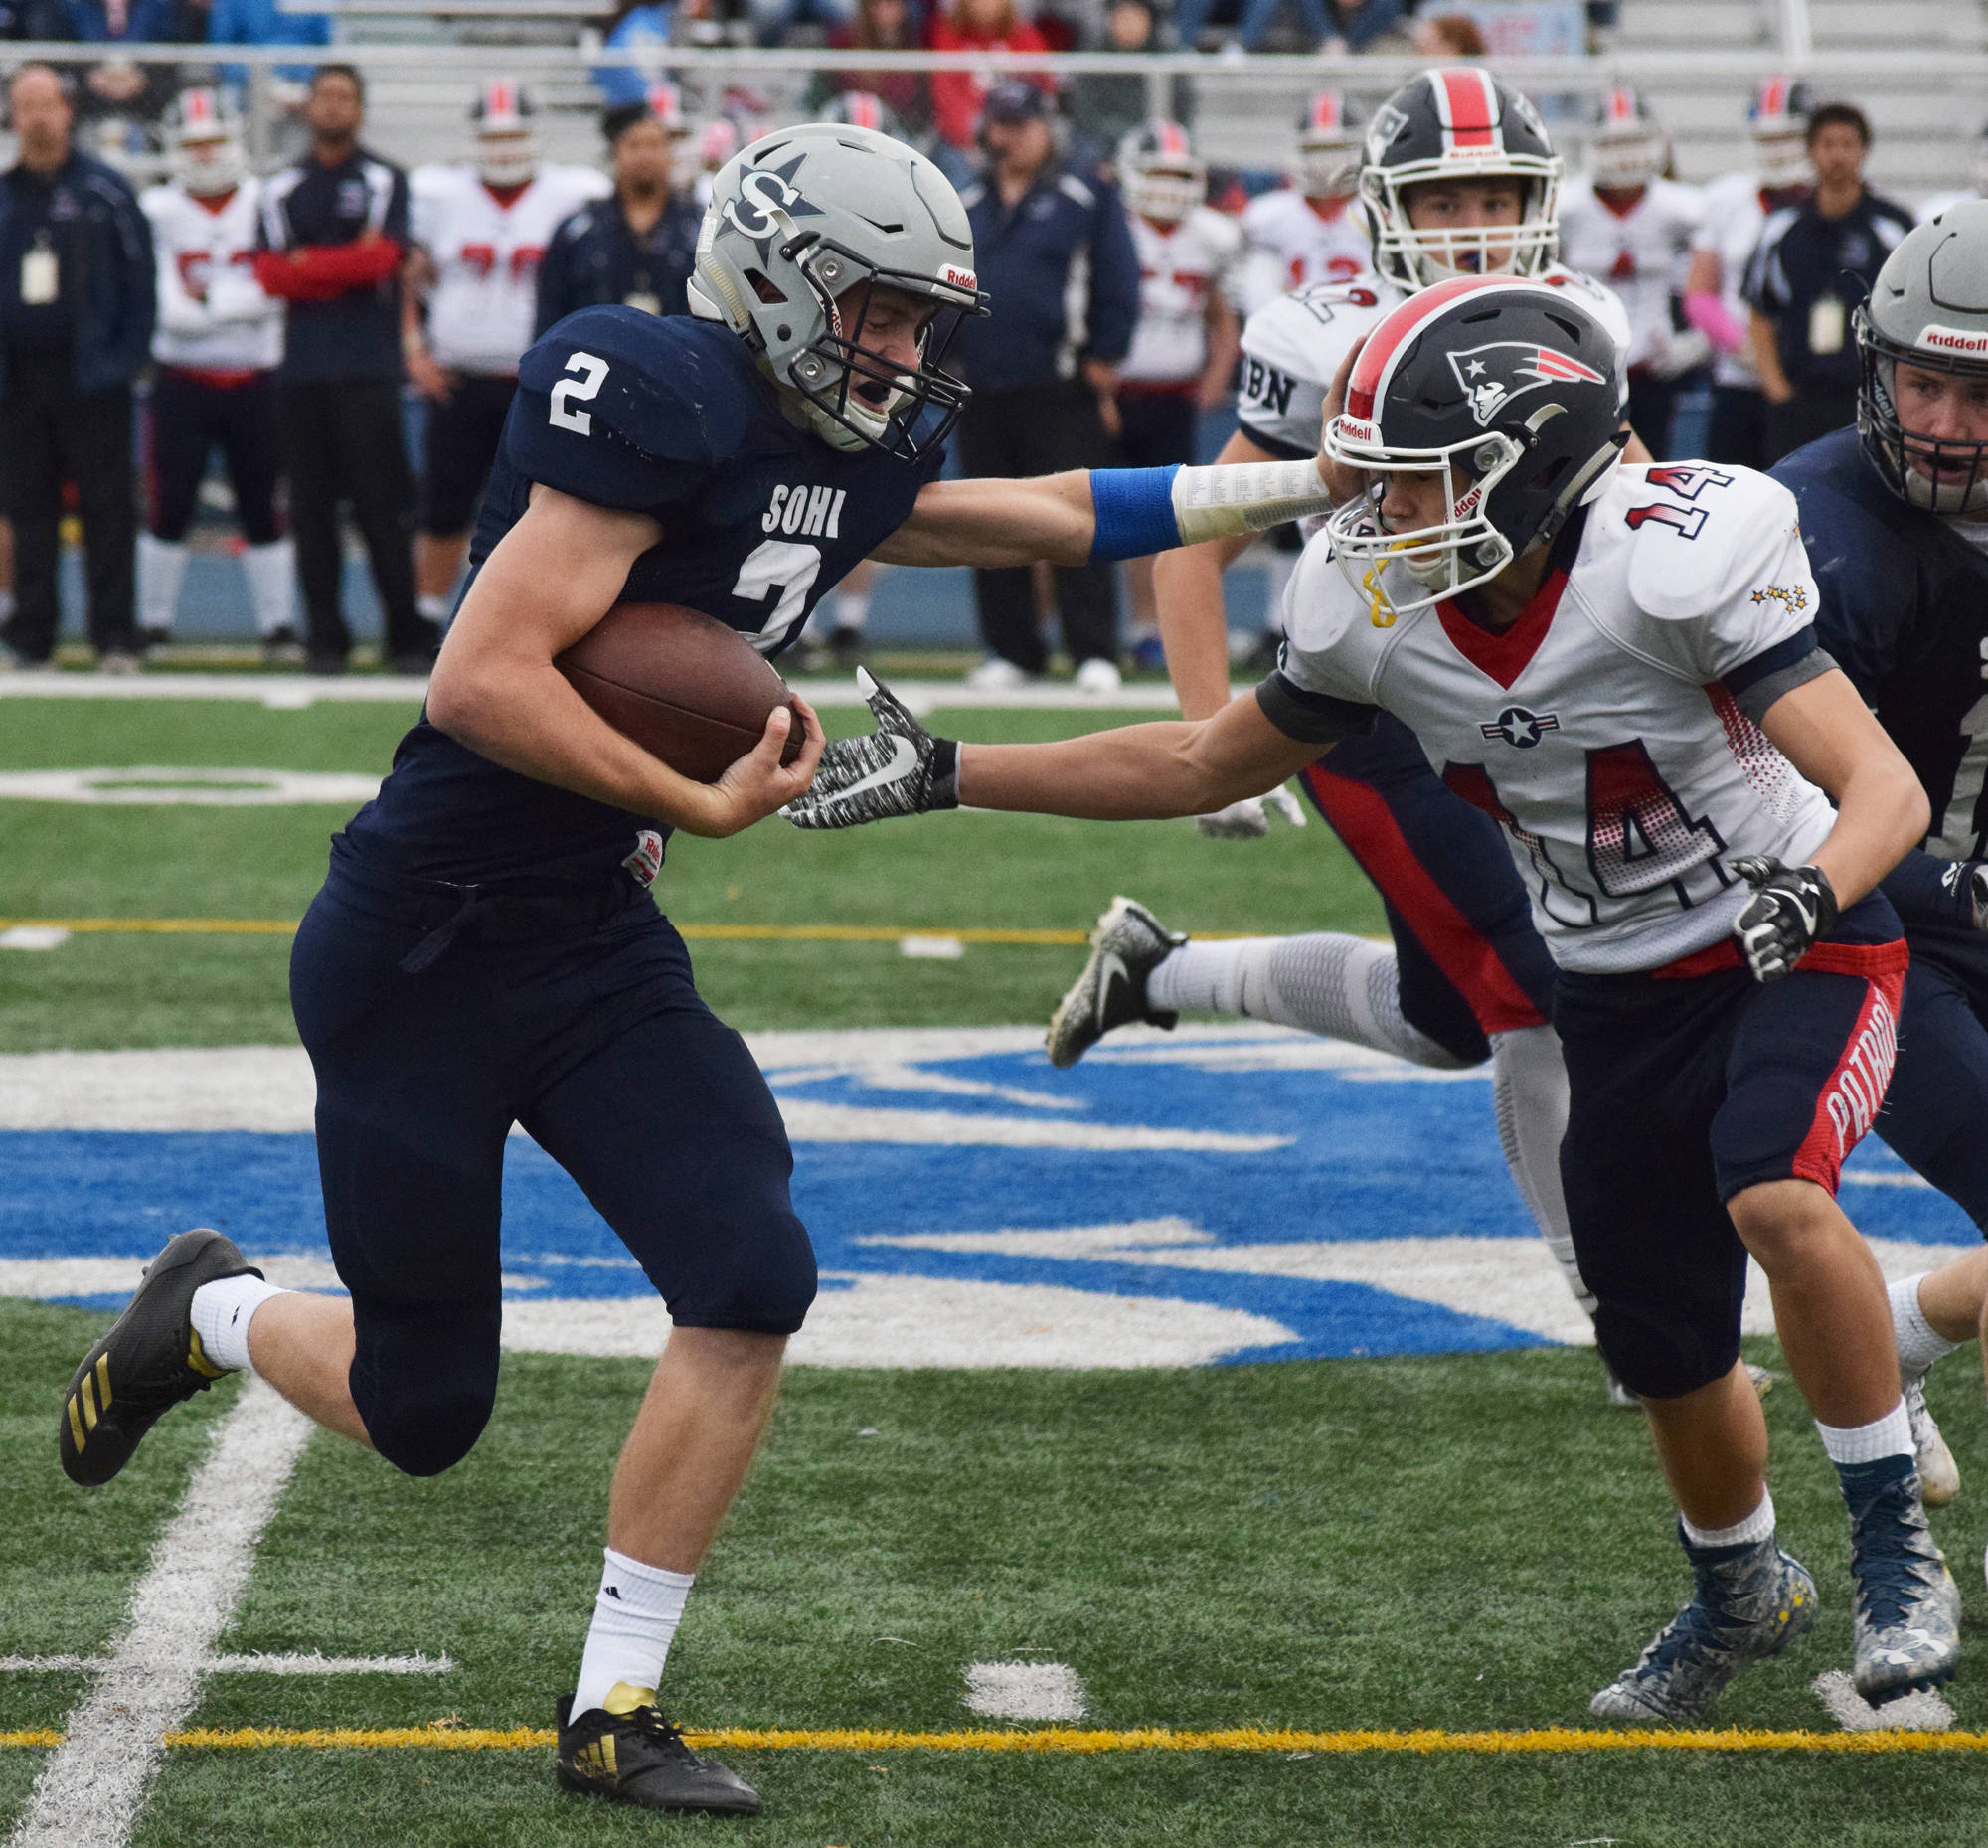 Soldotna running back Cody Quelland (2) stiff arms North Pole’s Chris Berrellez Saturday at the ASAA First National Bank state football semifinals at Palmer High School. (Photo by Joey Klecka/Peninsula Clarion)